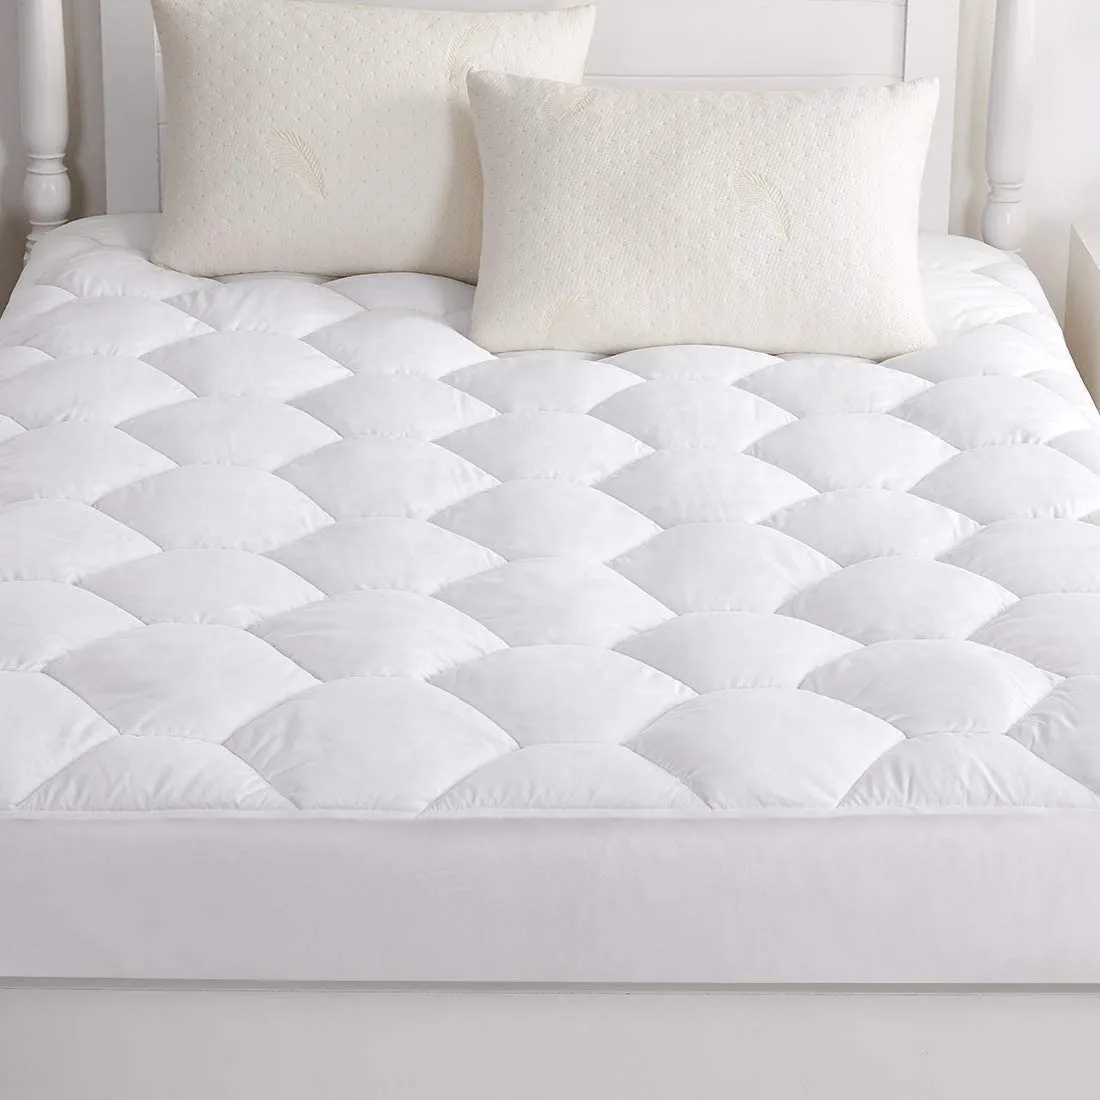 Mattress Pads cover Queen Hypoallergenic Quilted Fitted